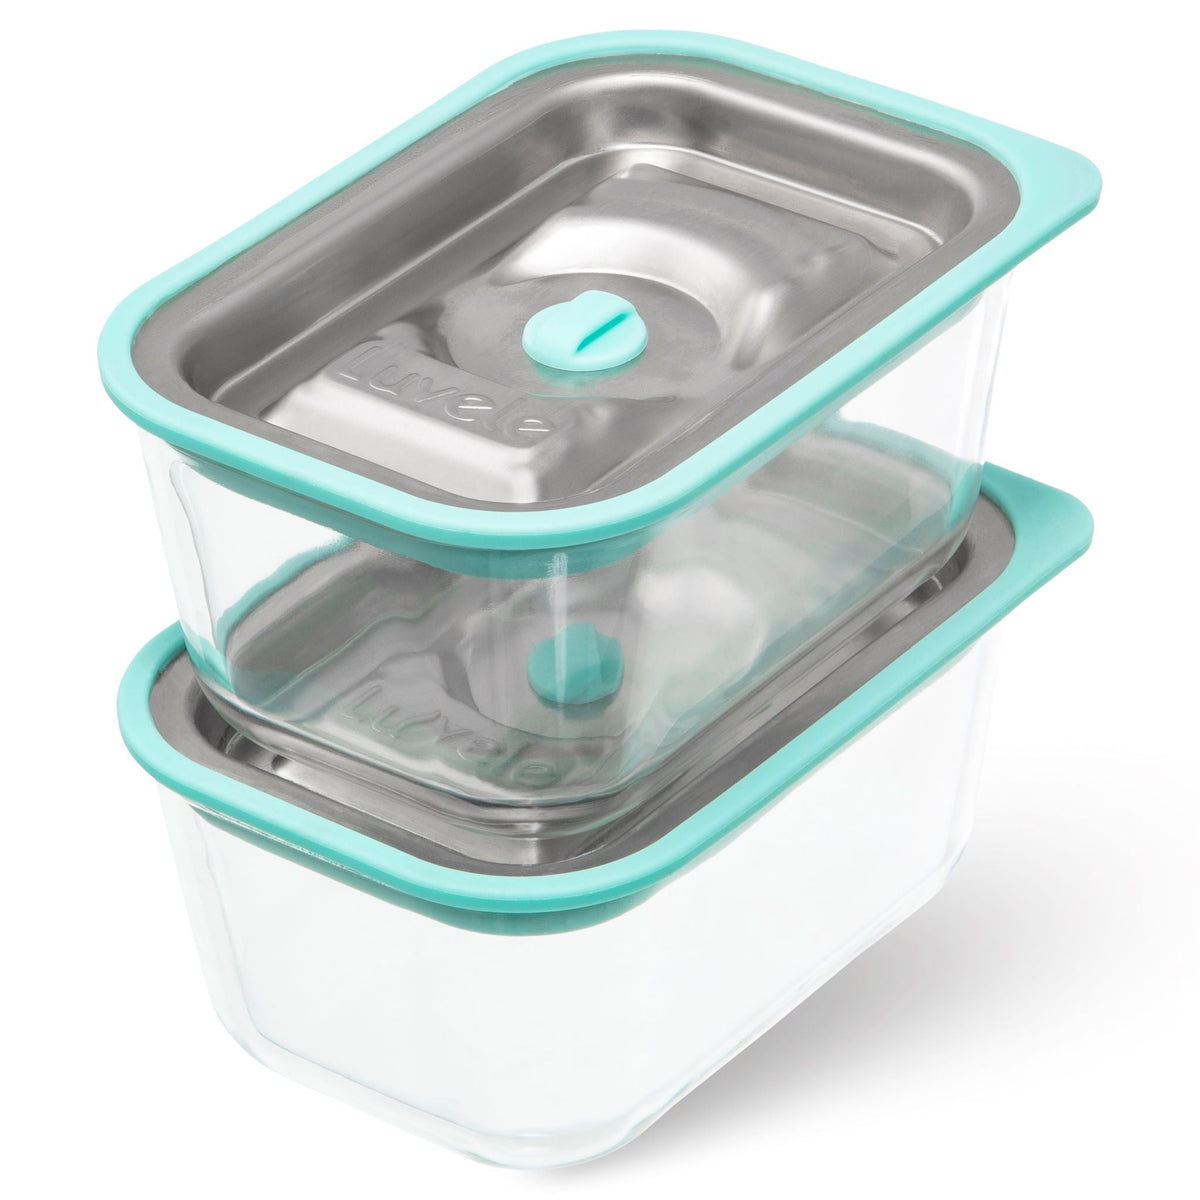 SNUGTOPIA Vacuum Seal Food Storage Containers - Fresh Save/Keep Dry - 2  Pcs, Clear, BPA Free, Leak Proof - Dishwasher, Freezer & Microwave Safe